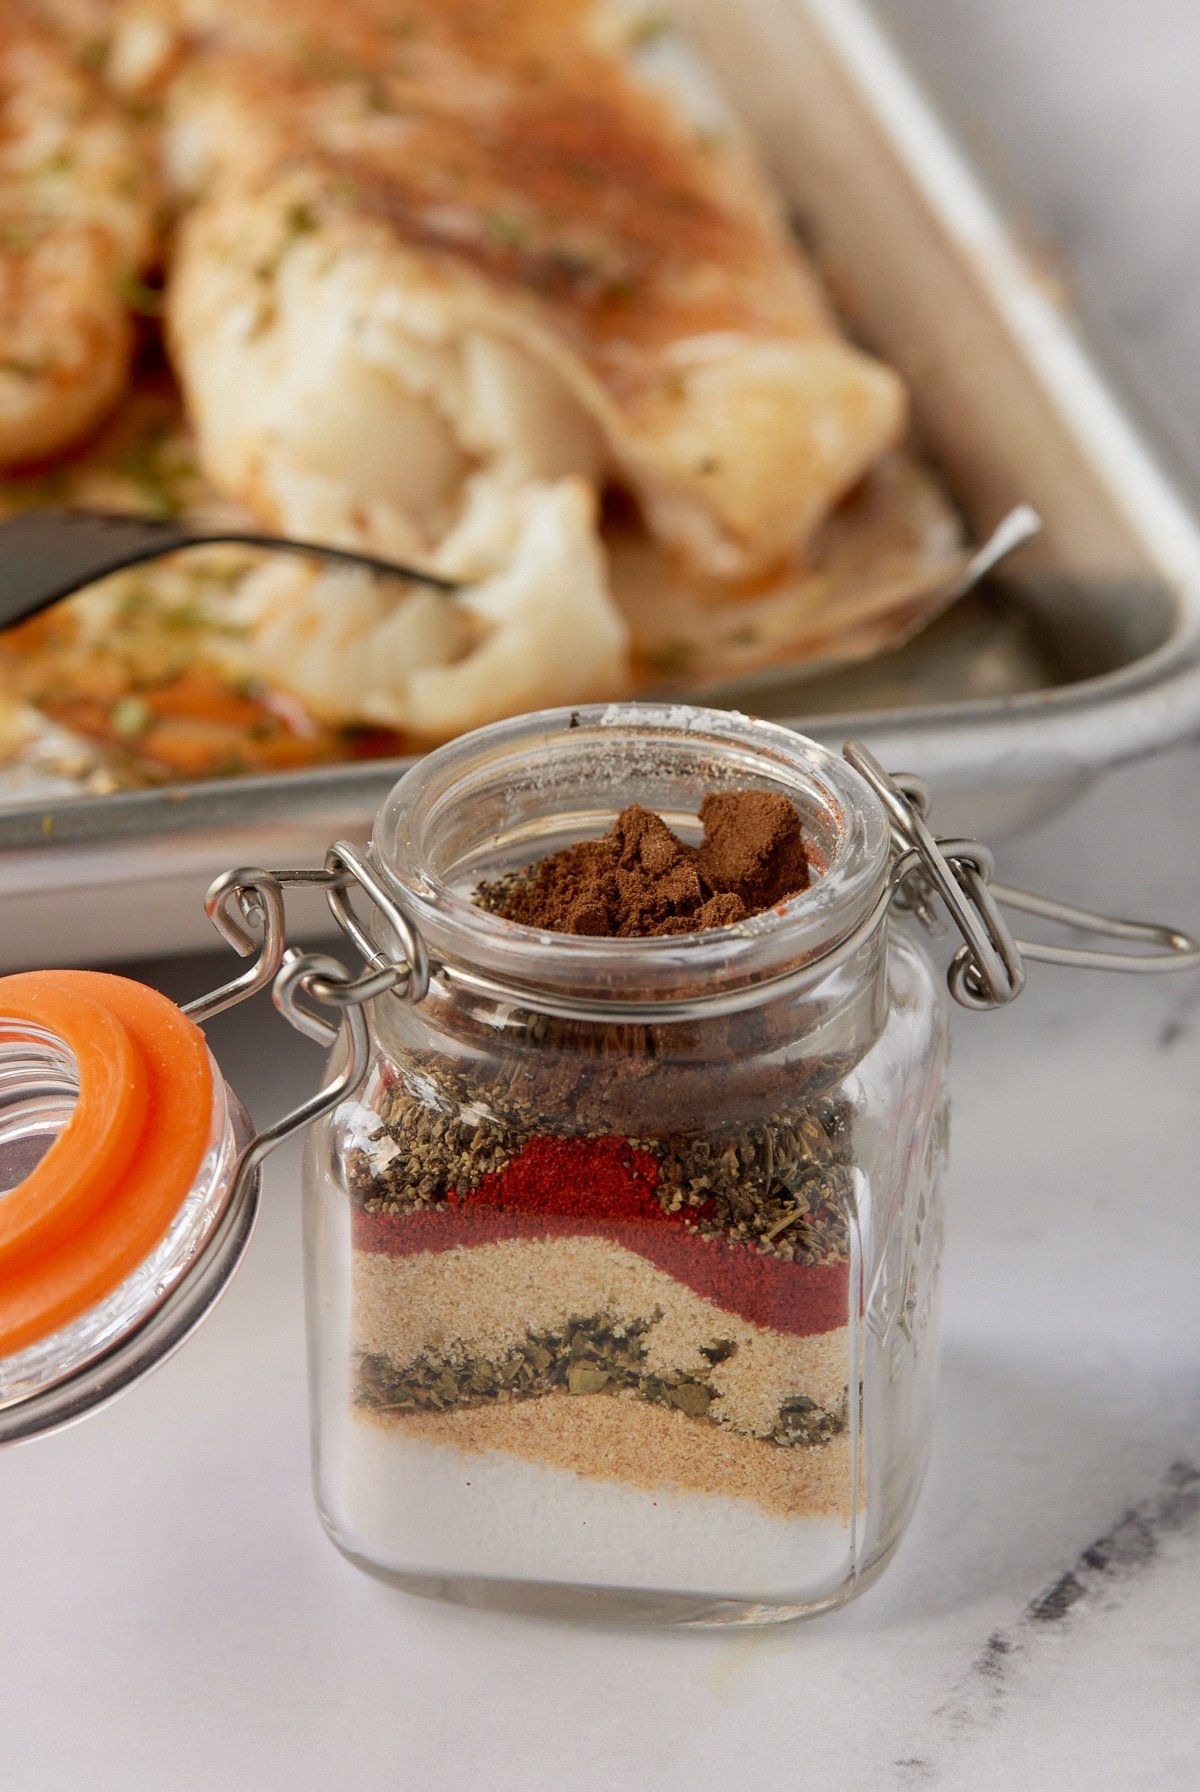 The seasonings layered in a small glass jar.